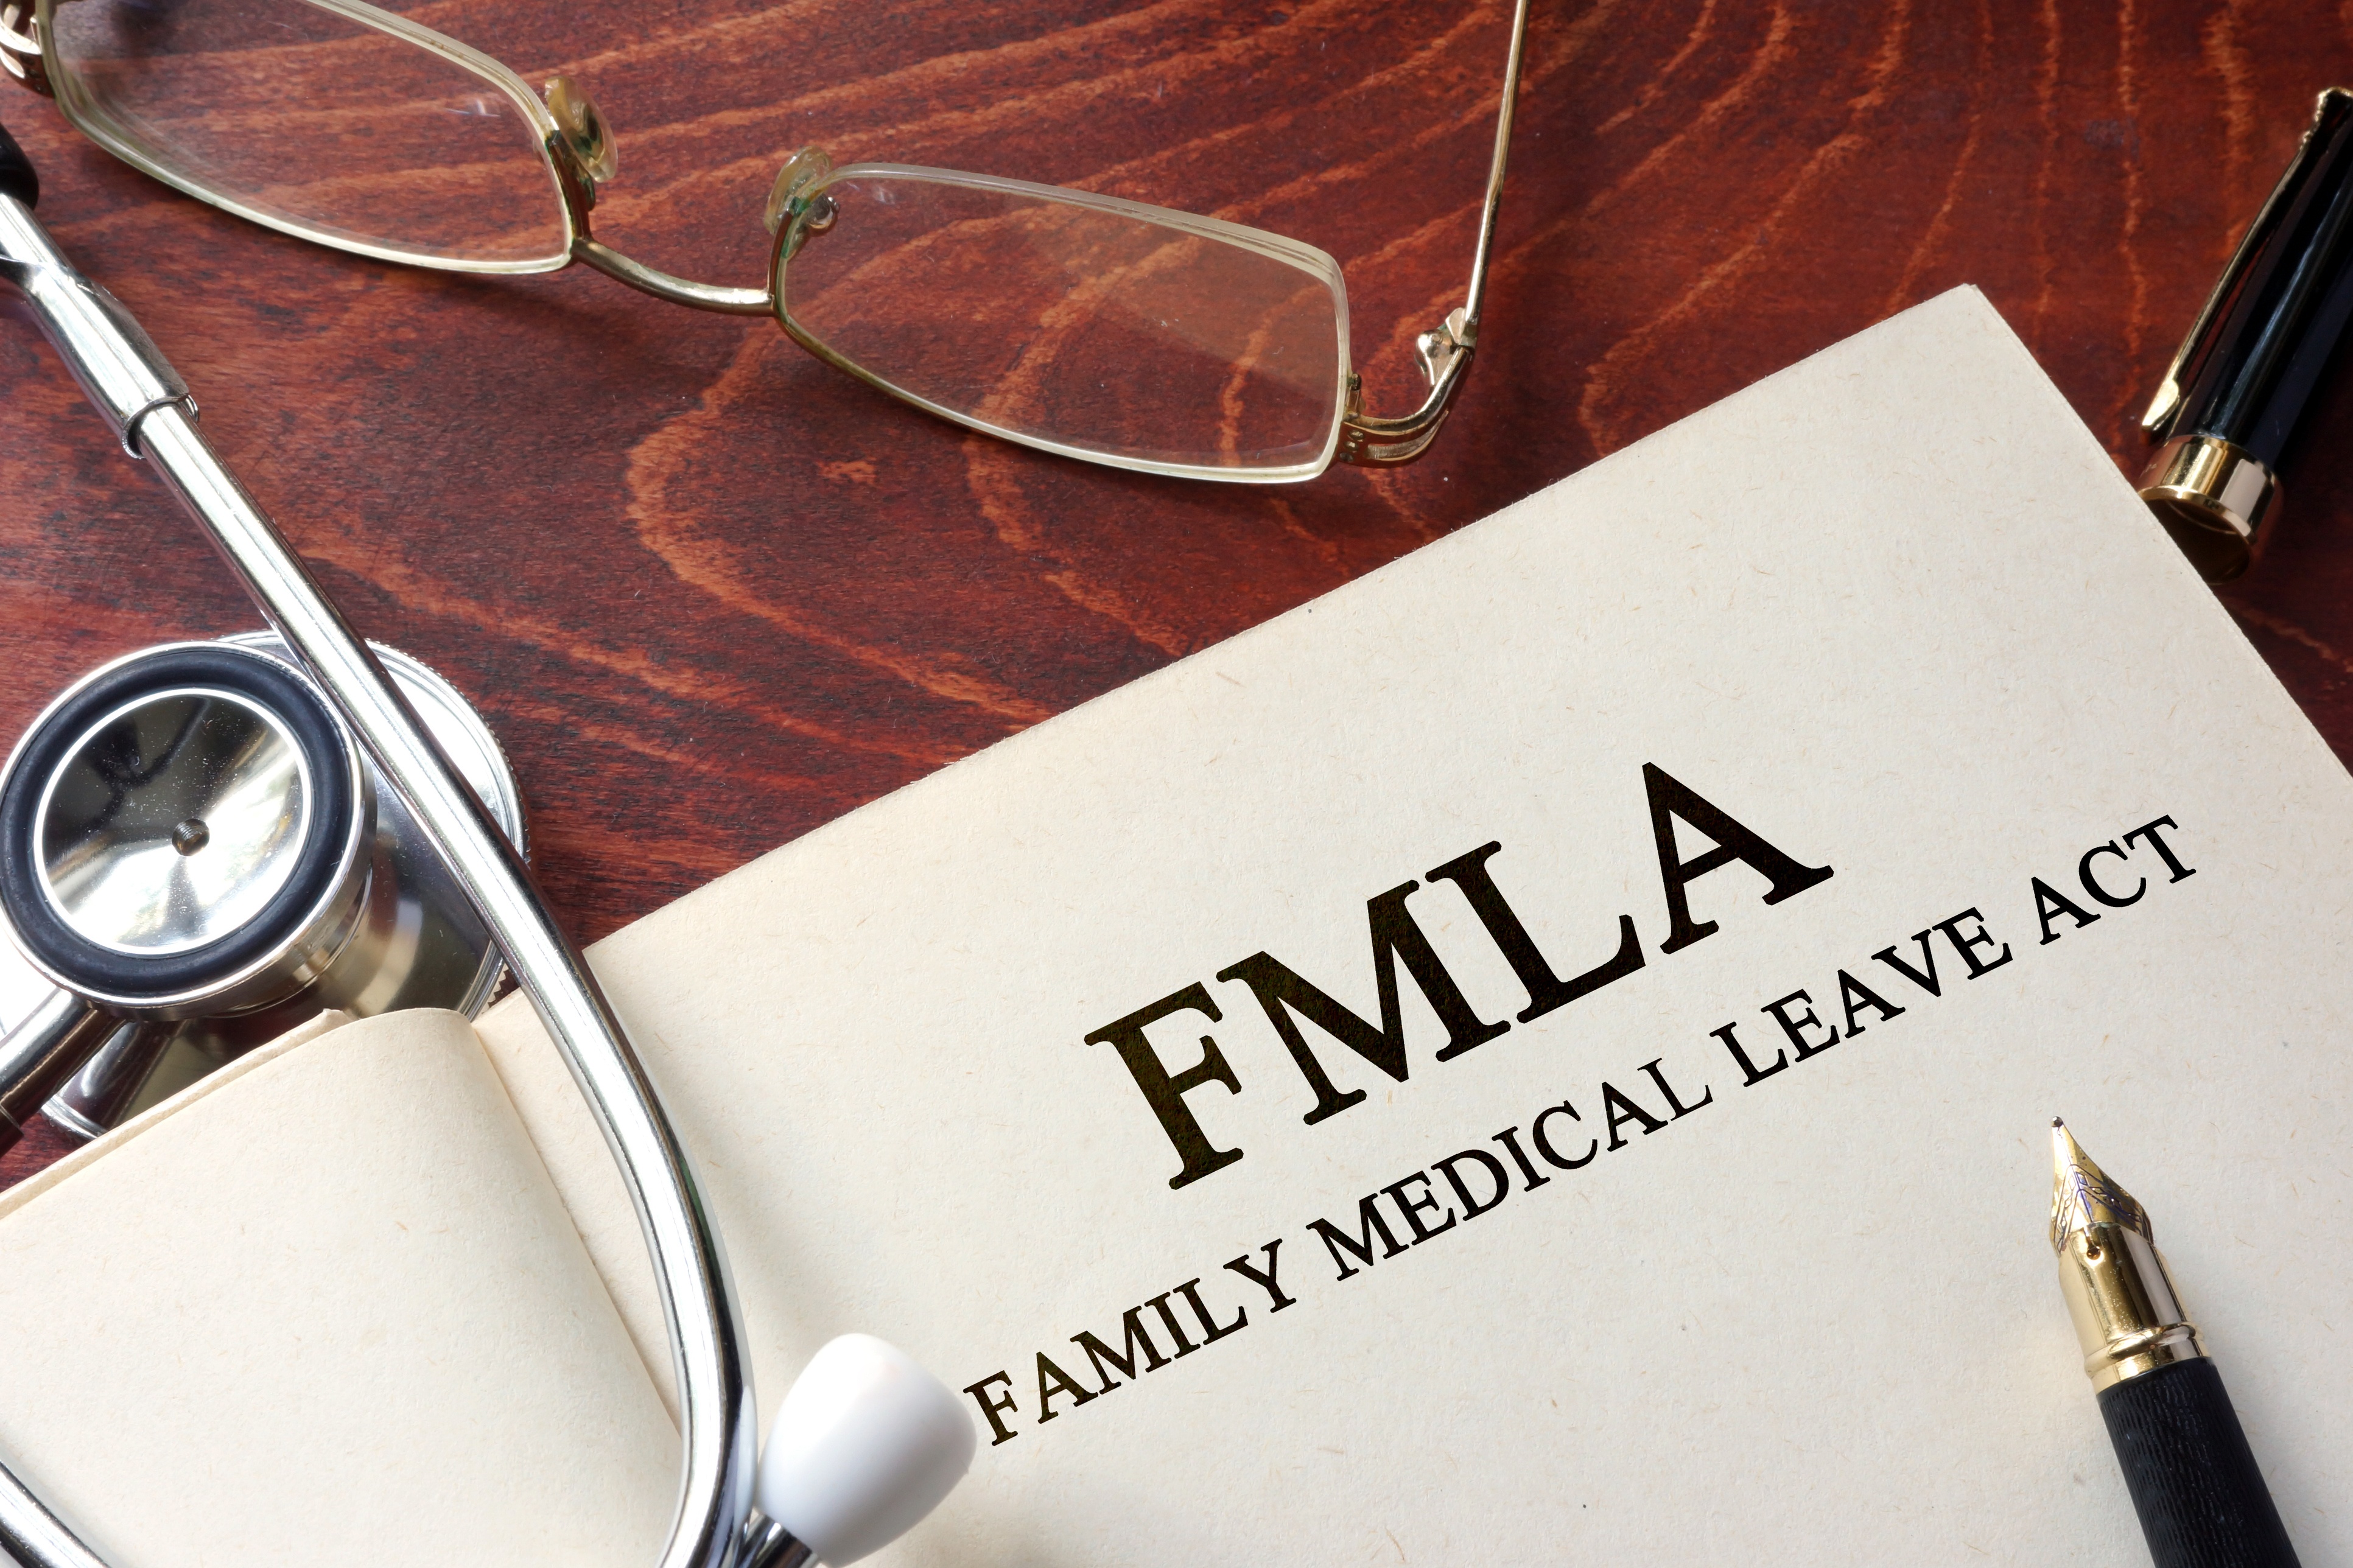 Family and Medical Leave Act FMLA